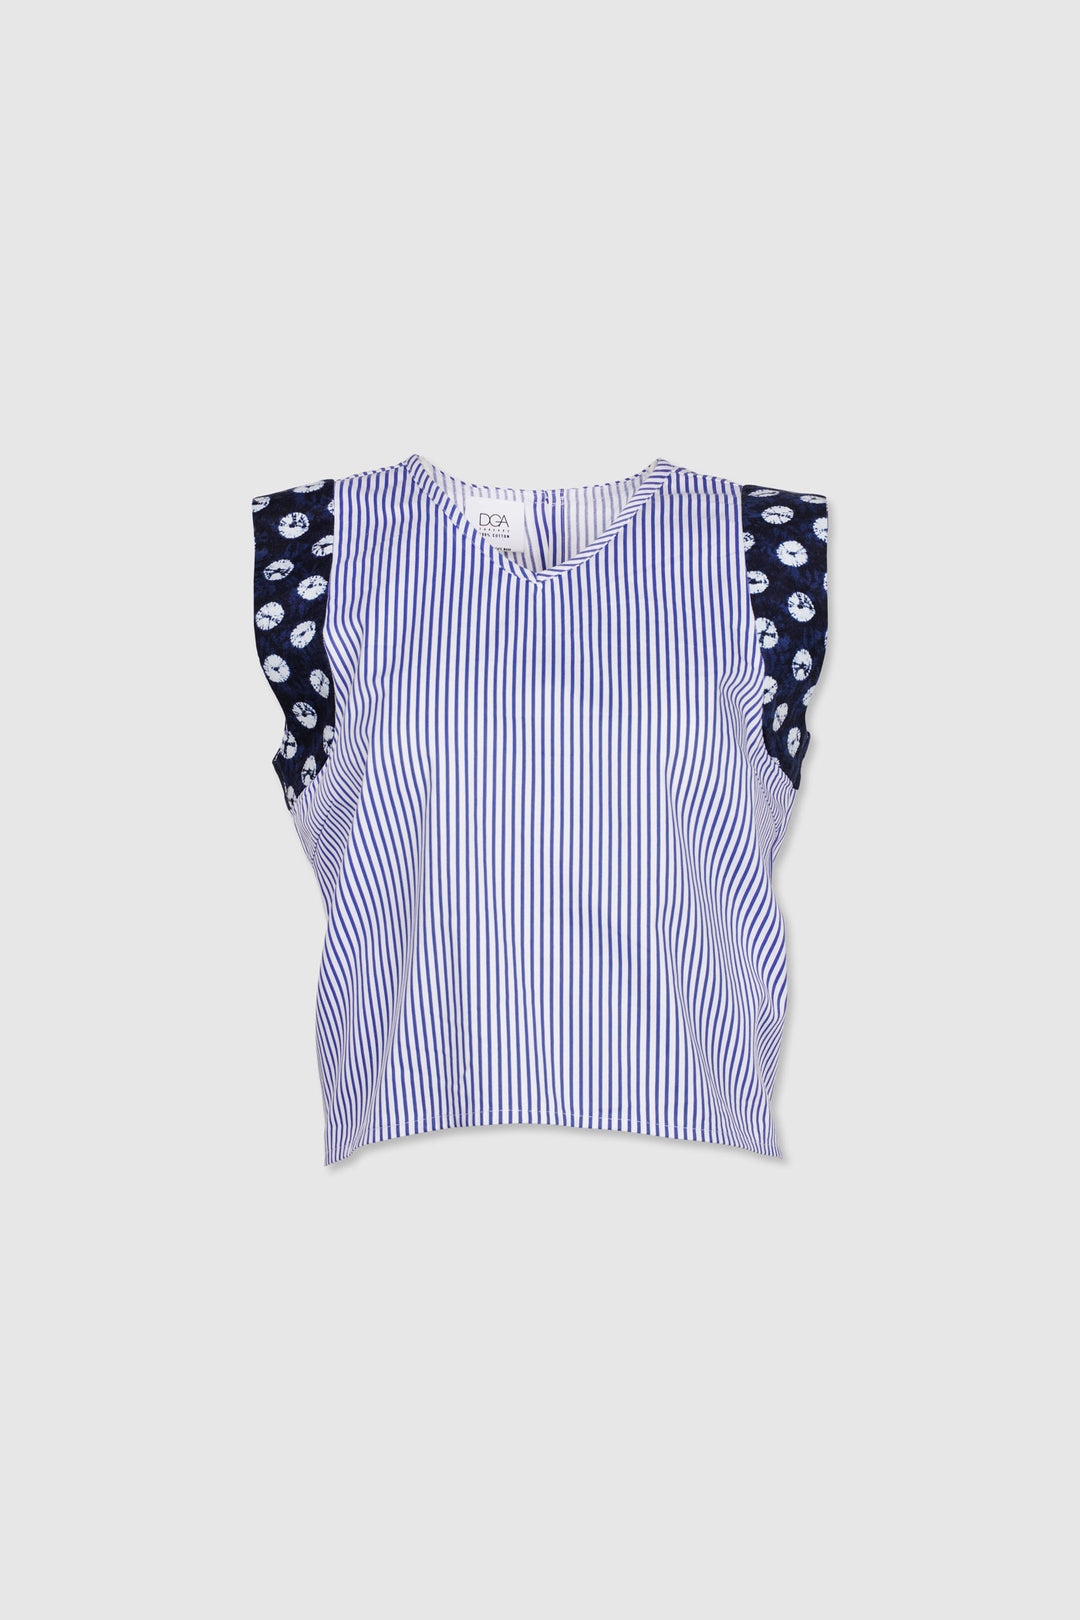 Sleeveless White and Blue Striped Cotton Top with Patterned Arm-Holes